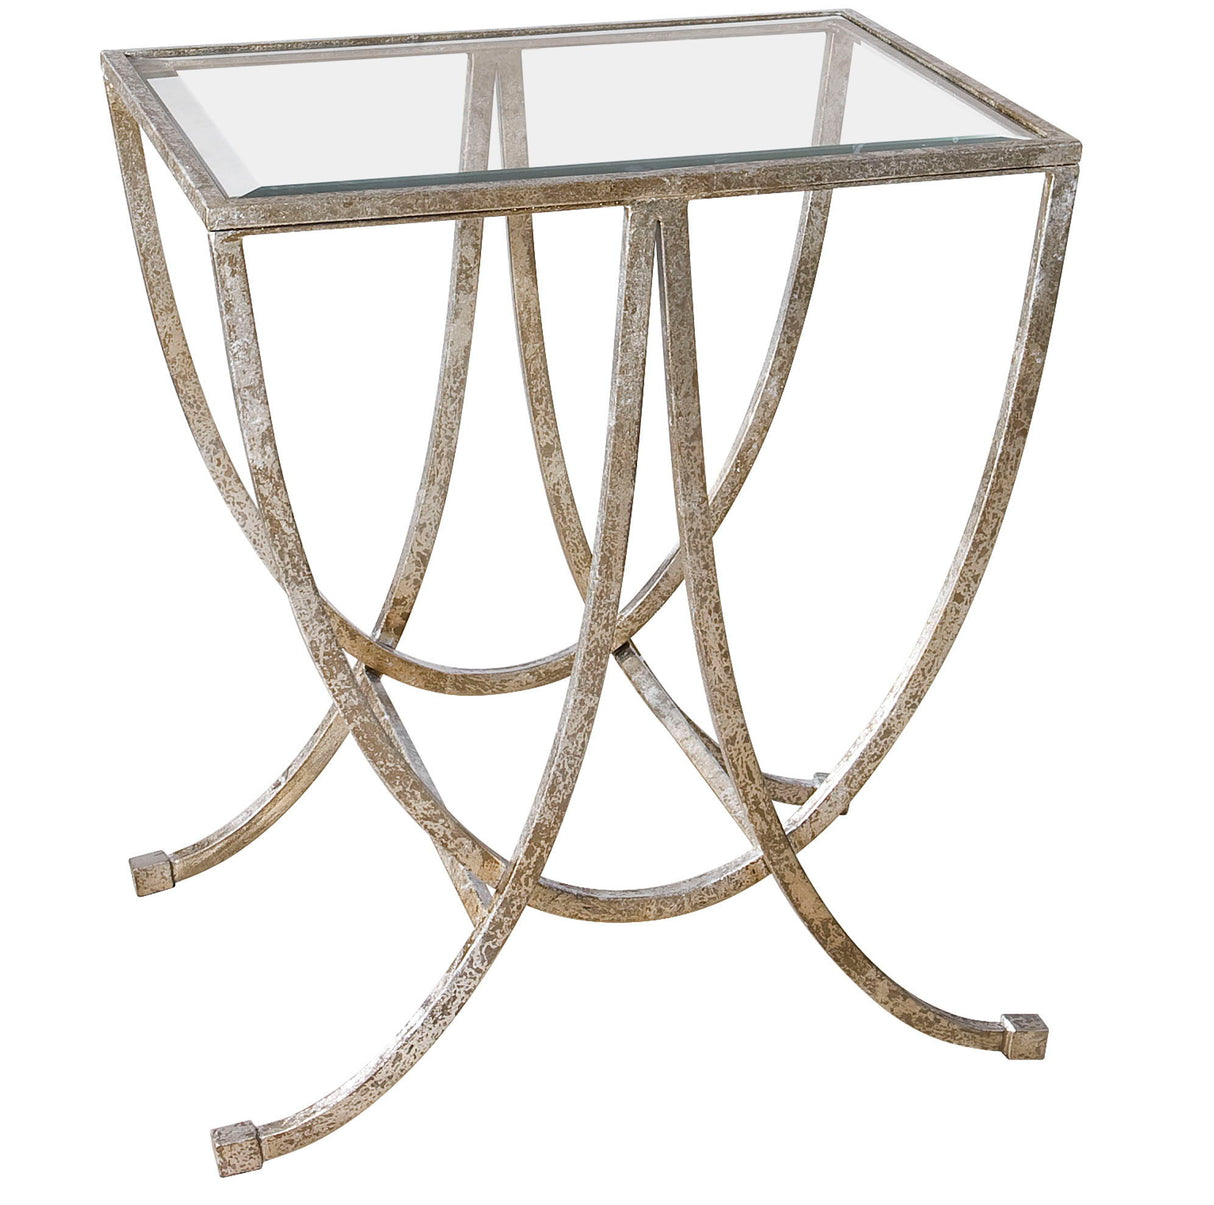 Marta - Side Table - Antiqued Silver